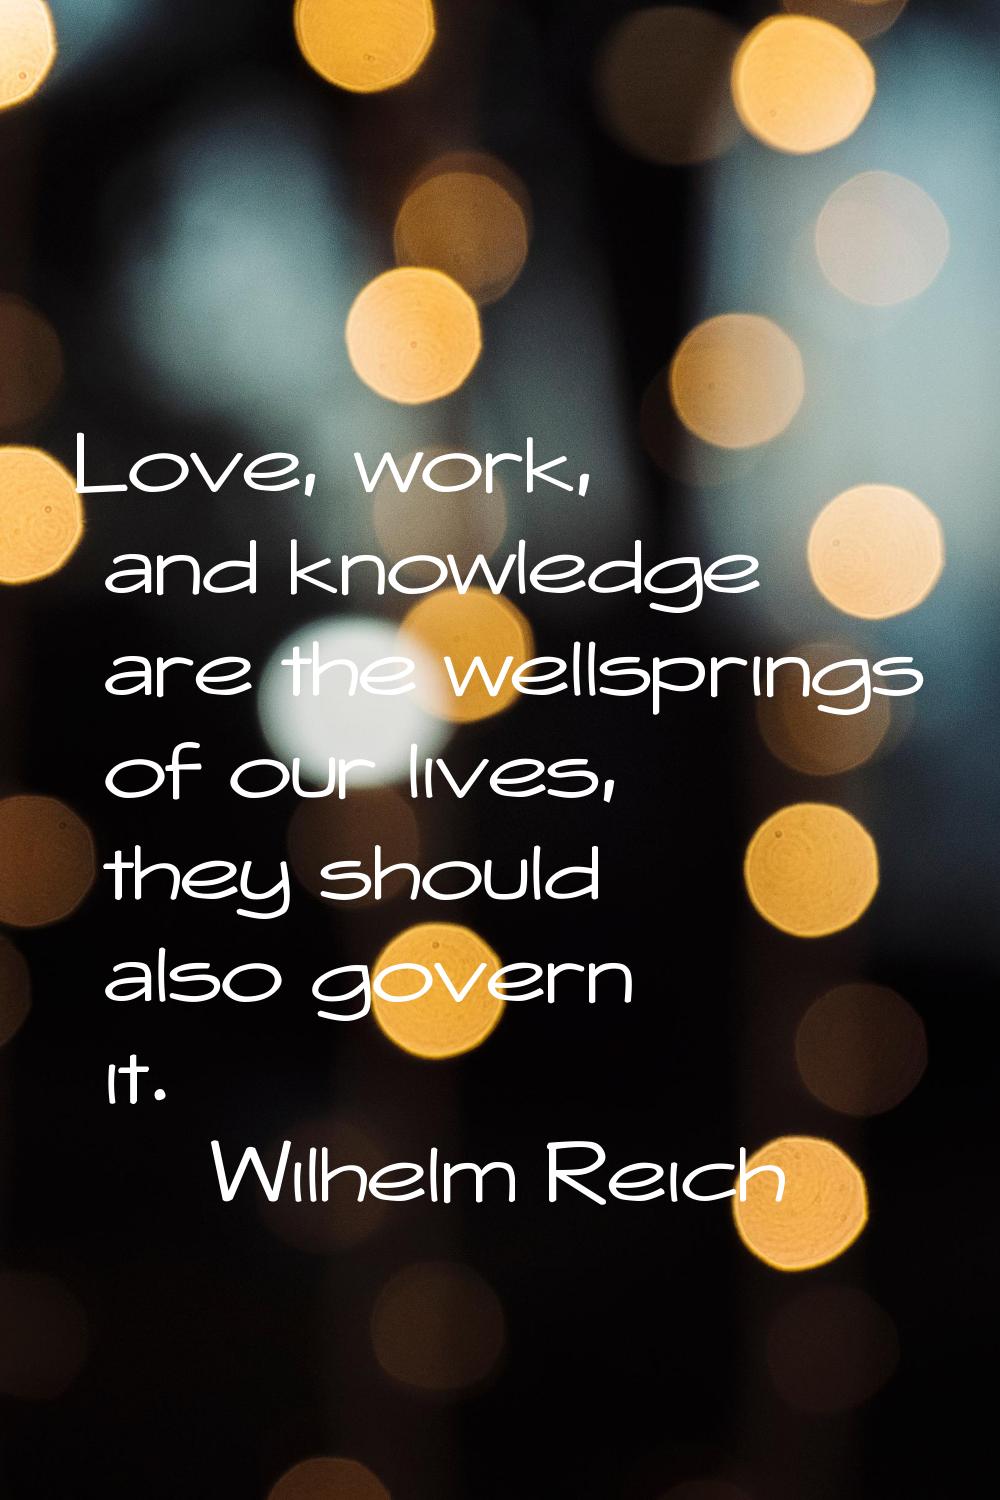 Love, work, and knowledge are the wellsprings of our lives, they should also govern it.